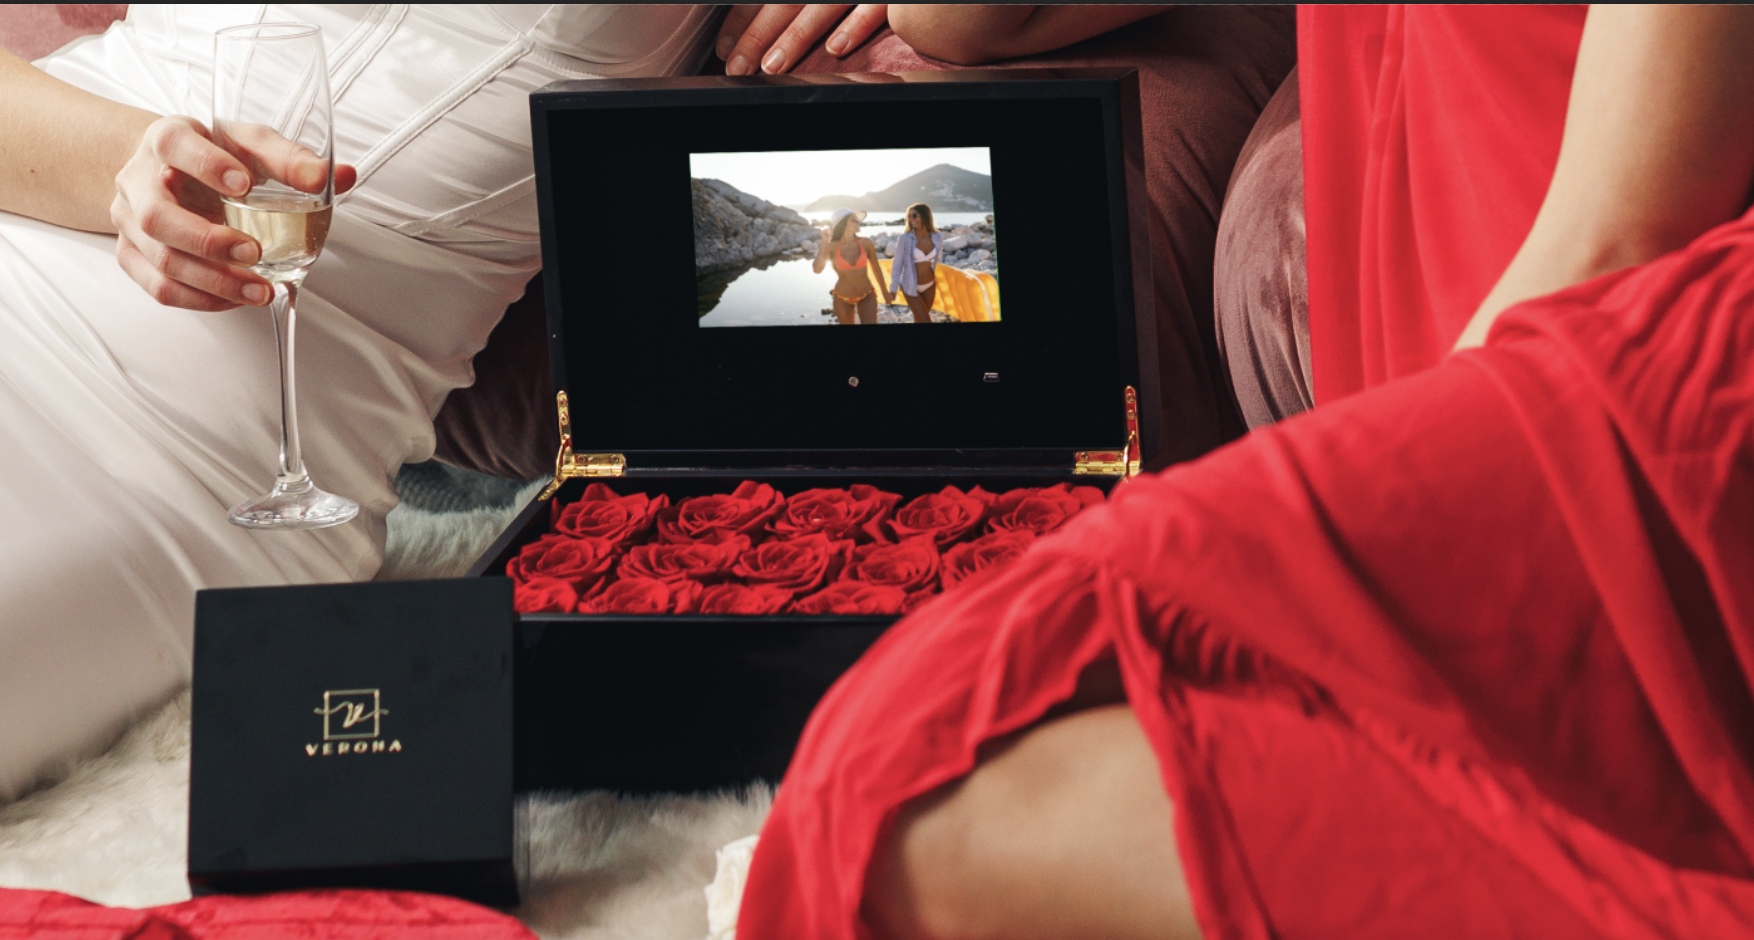 Verona Roses with a video screen that plays a personalized video